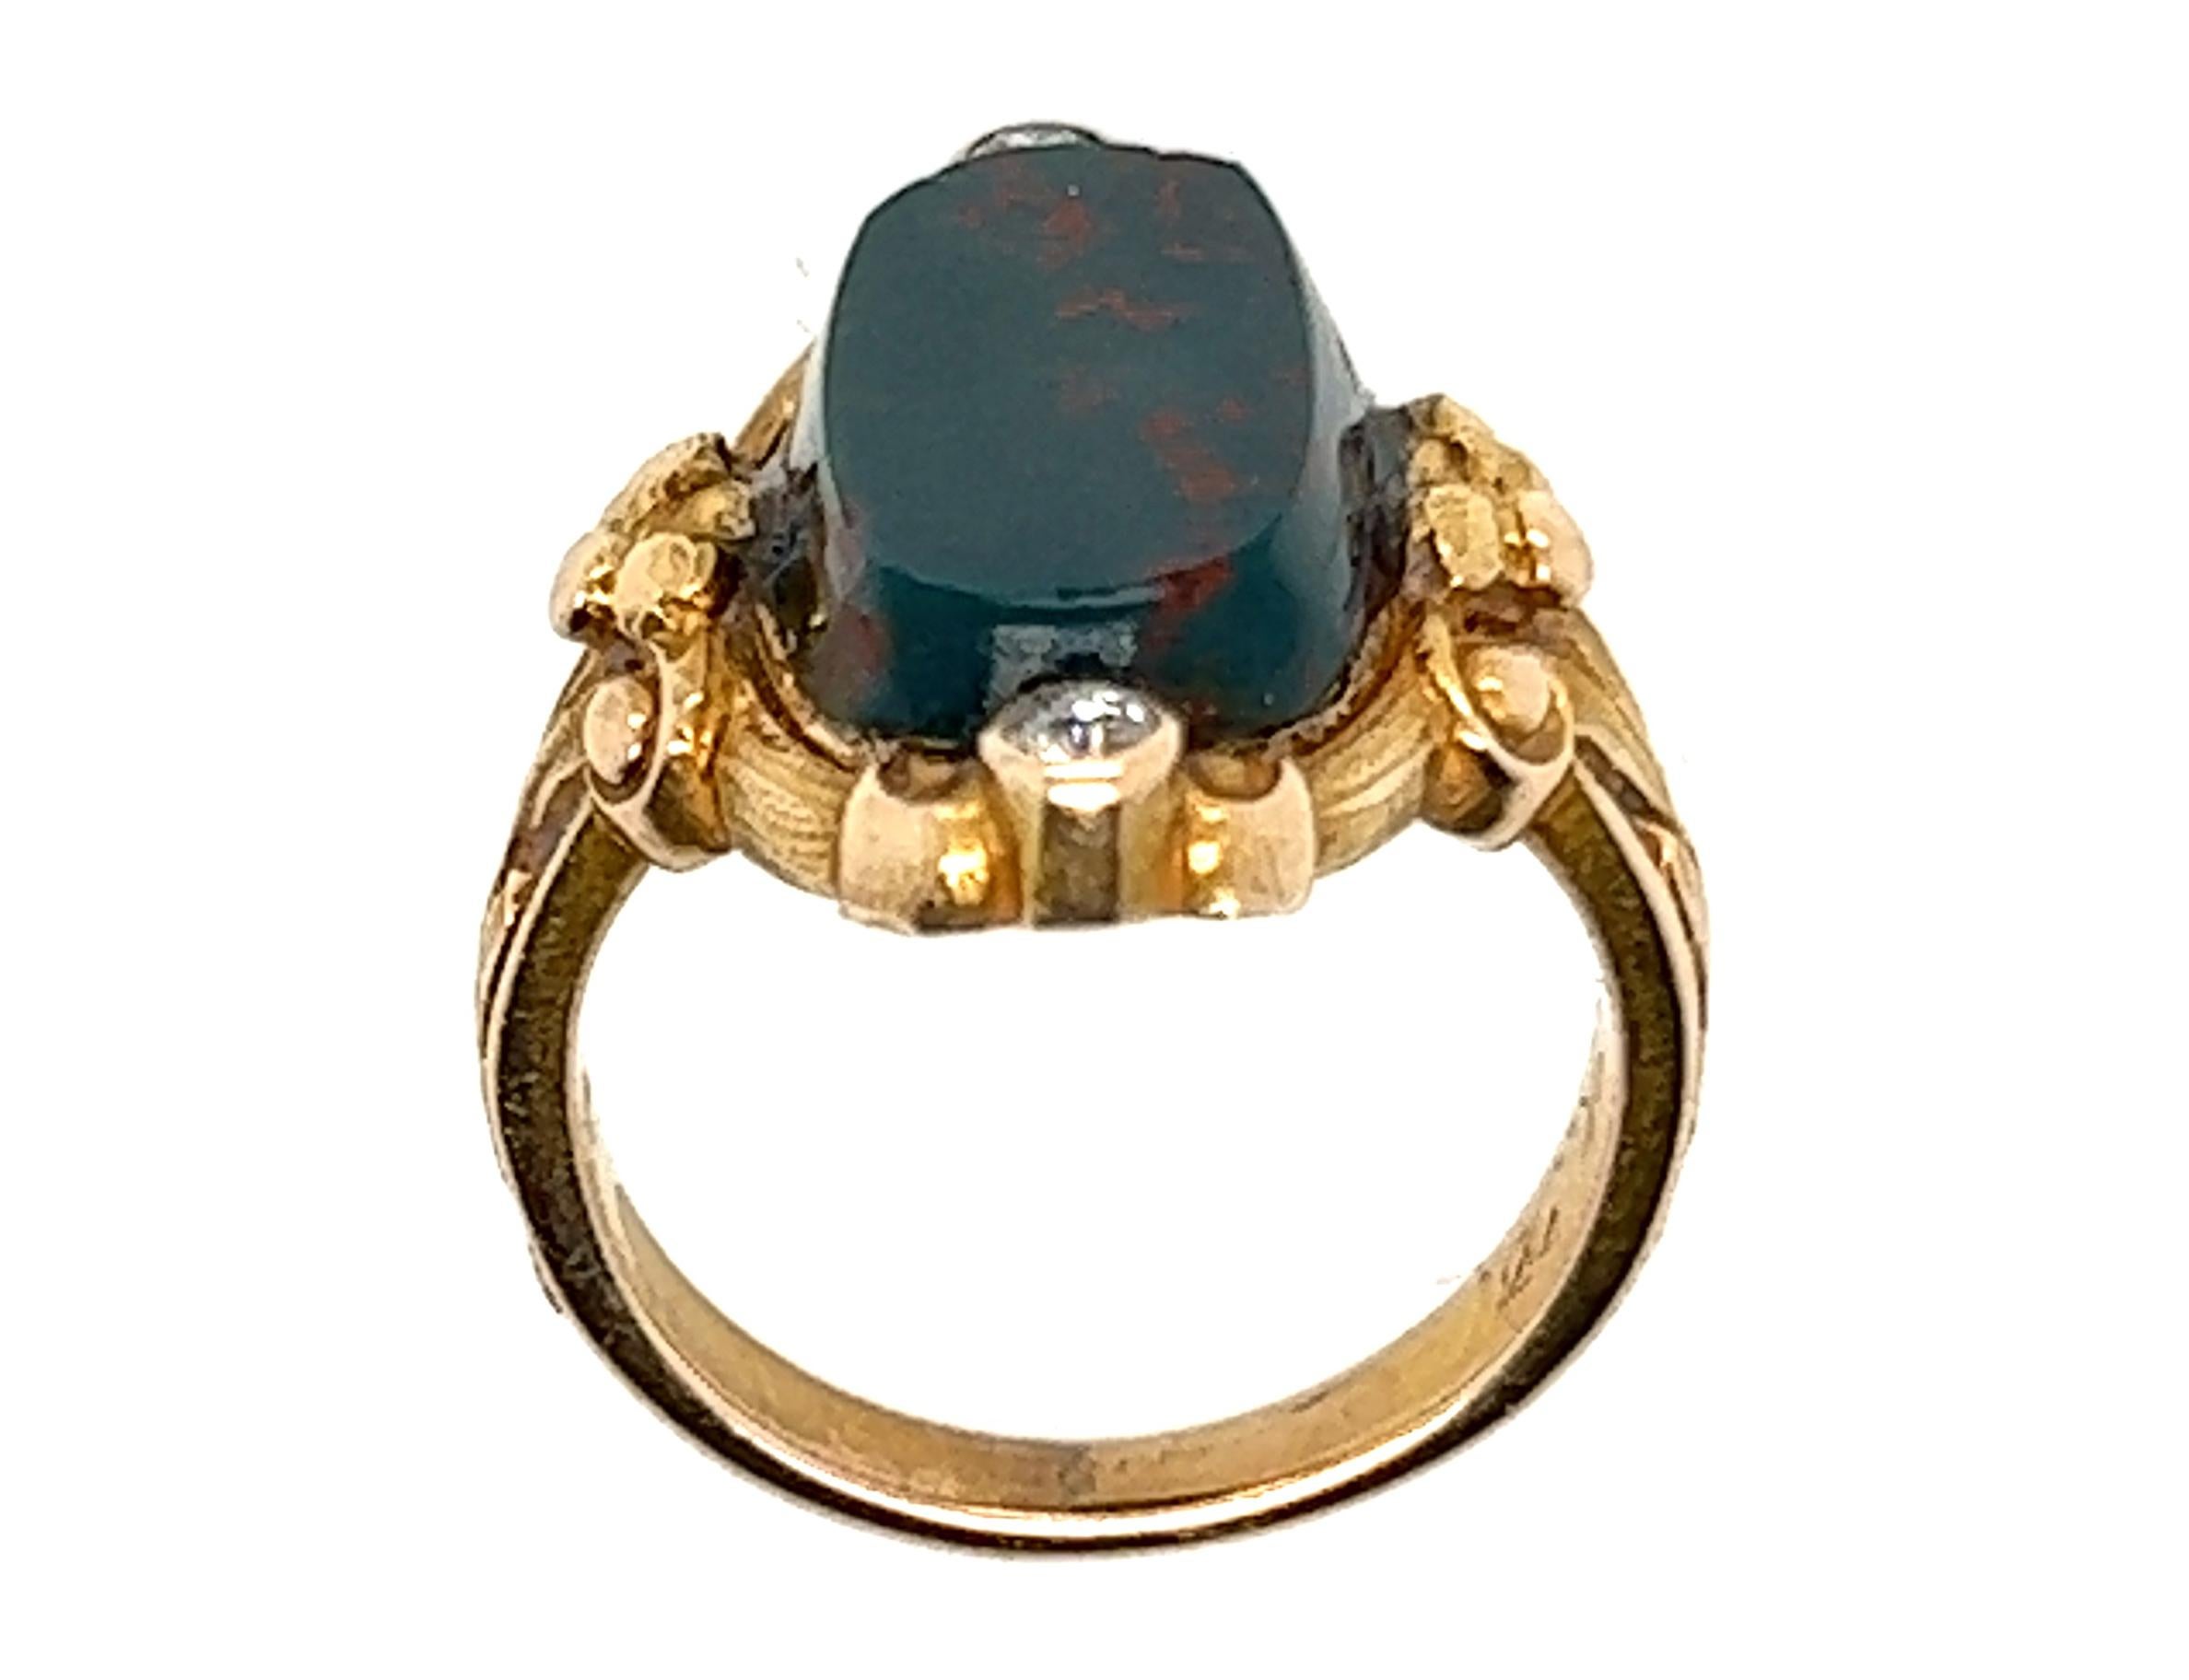 Genuine Original Art Noveau Antique from 1914 Bloodstone Diamond Ring Hand Engraved Flowers 14K Yellow Gold


Features a 14.9 x 8mm Genuine Natural Oval Bloodstone Gemstone

Defines Art Noveau

Hand Engraved Flowers

Genuine Old Mine Cut Diamonds